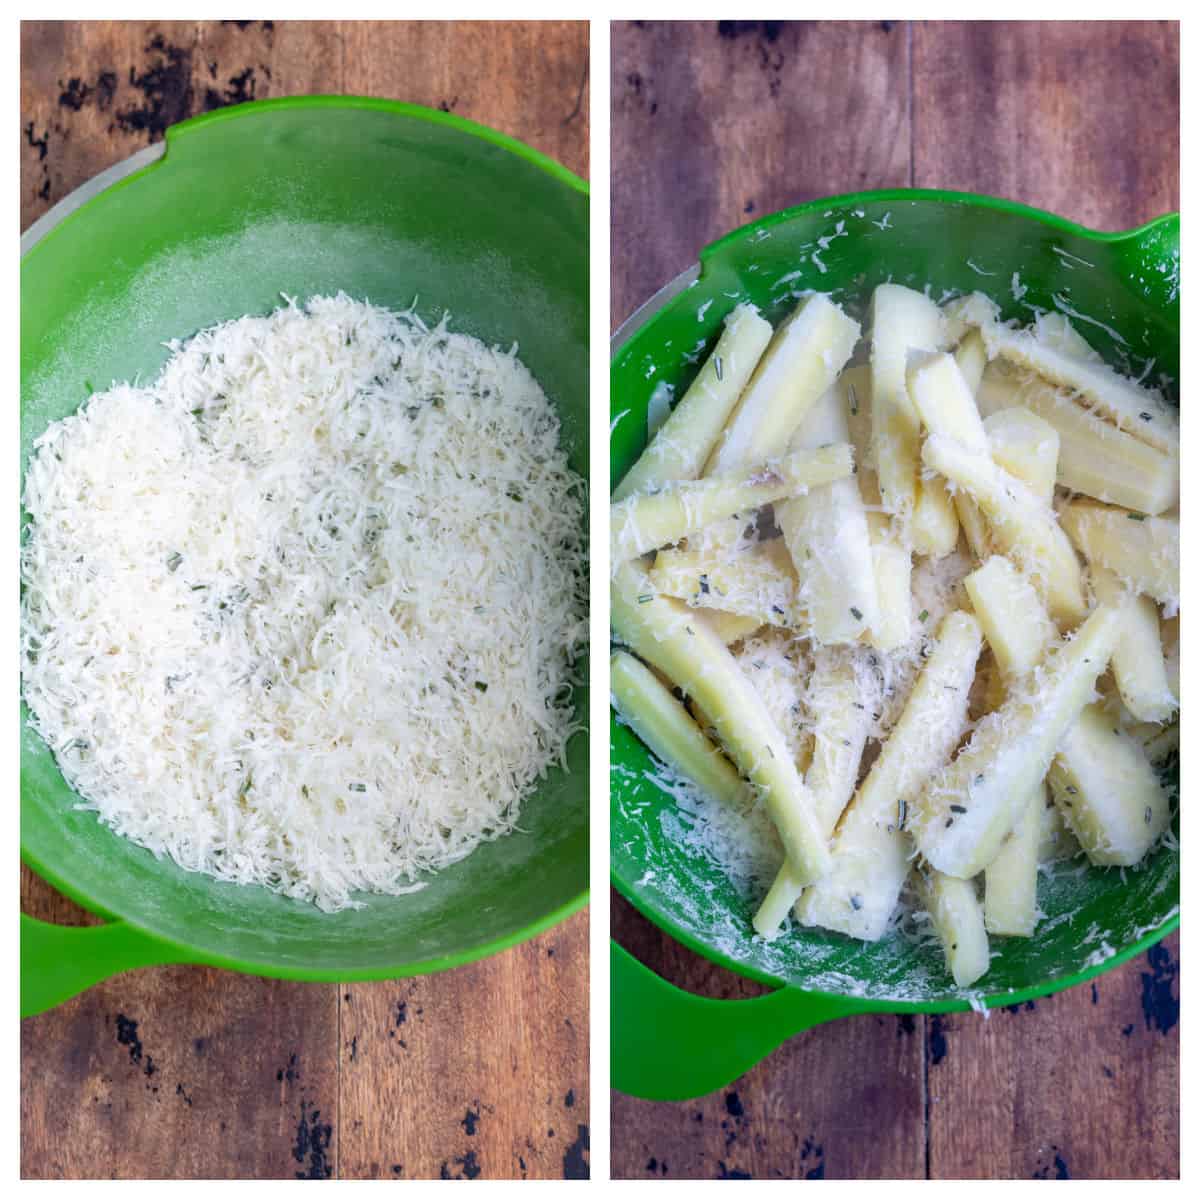 Bowl of flour and parmesan, and parsnips added.